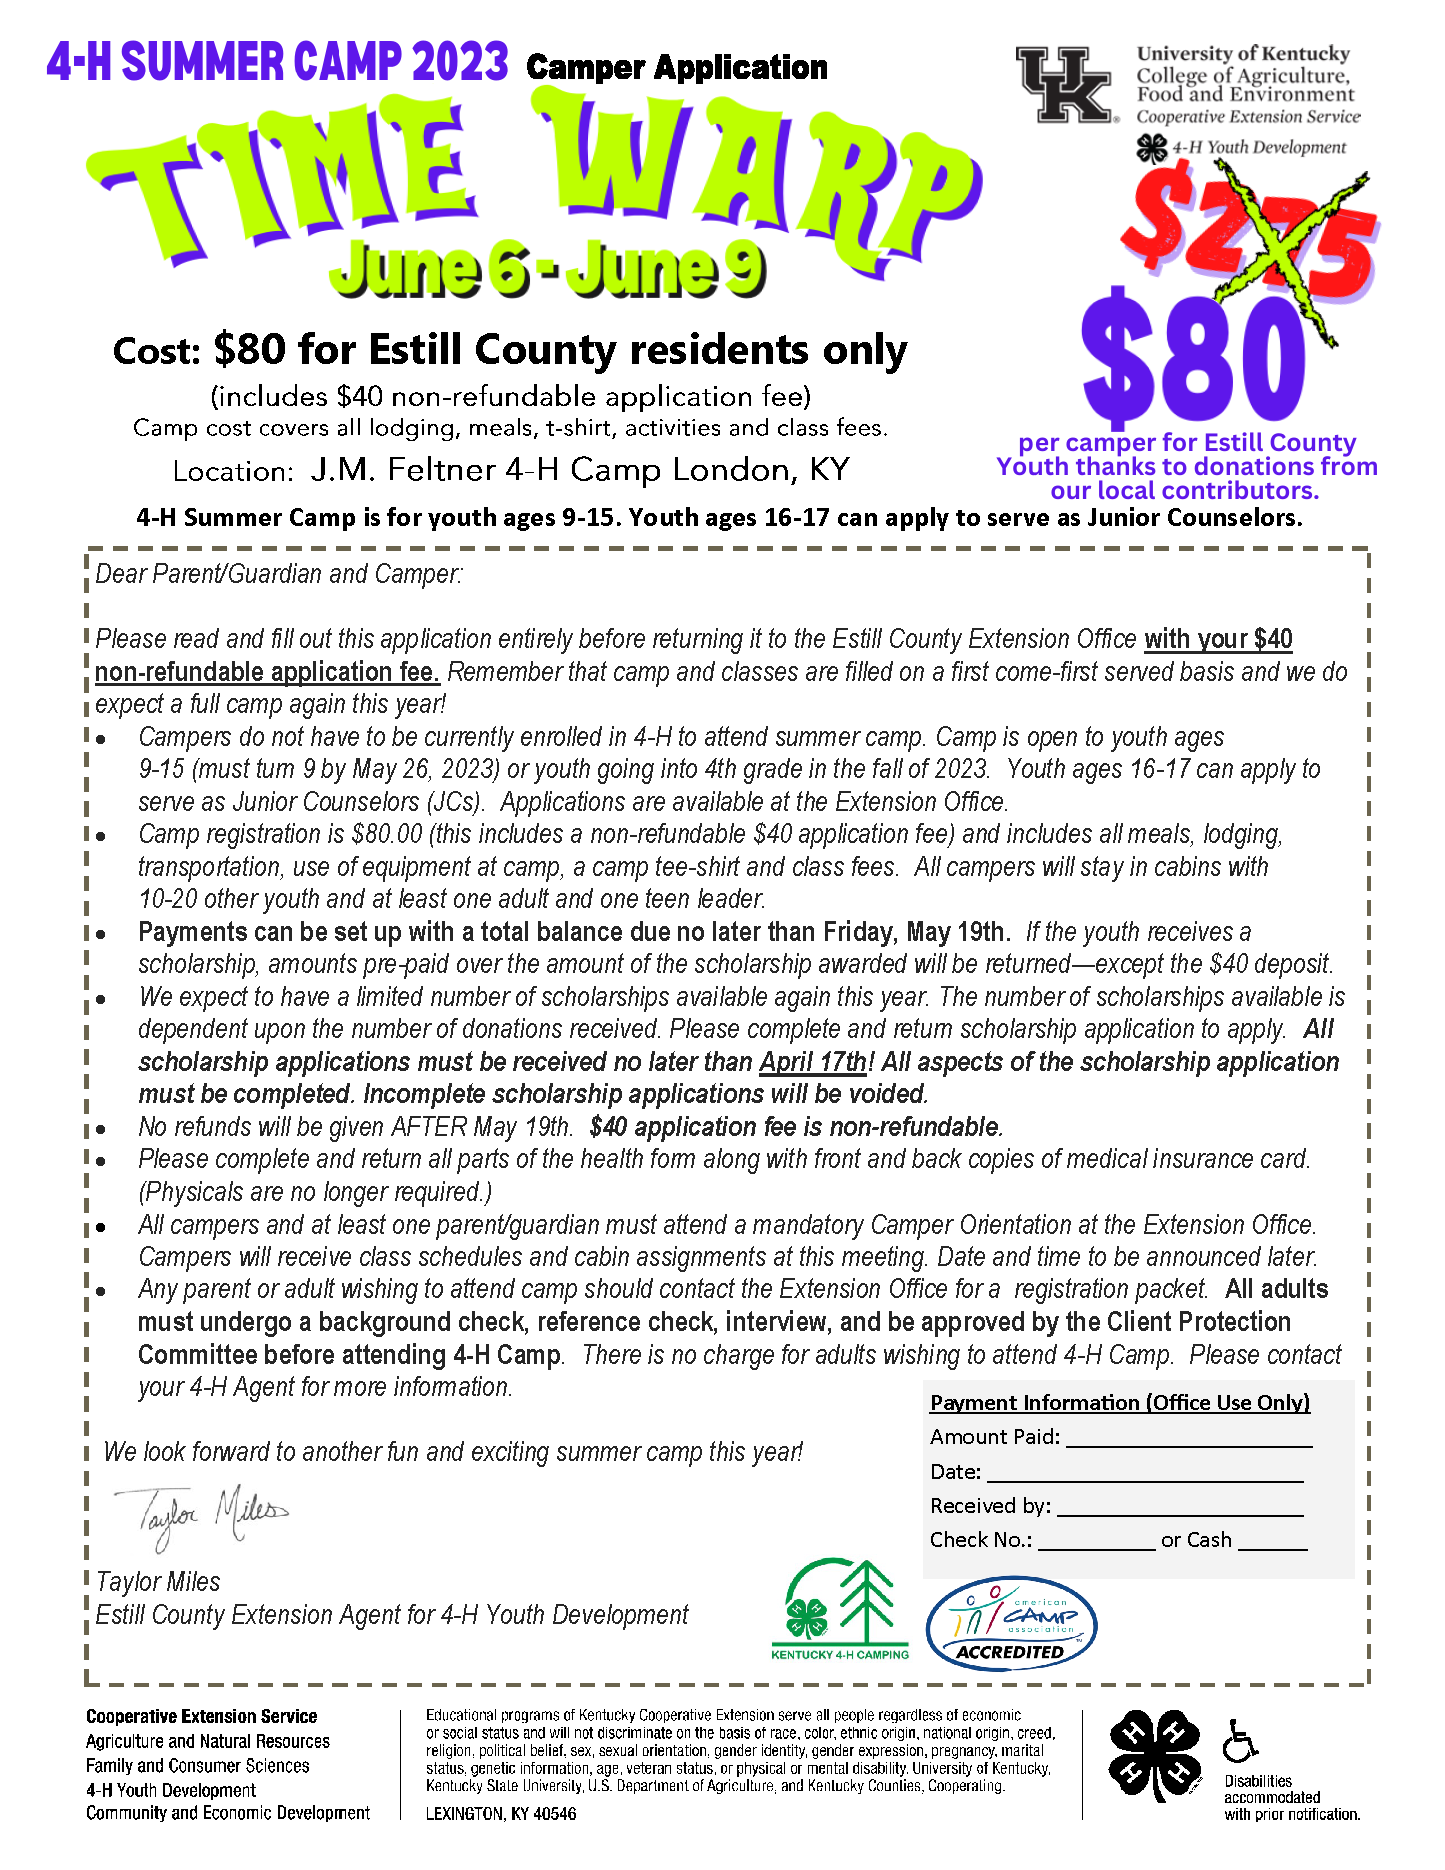 Information on 4-H Summer Camp for Estill County Youth 